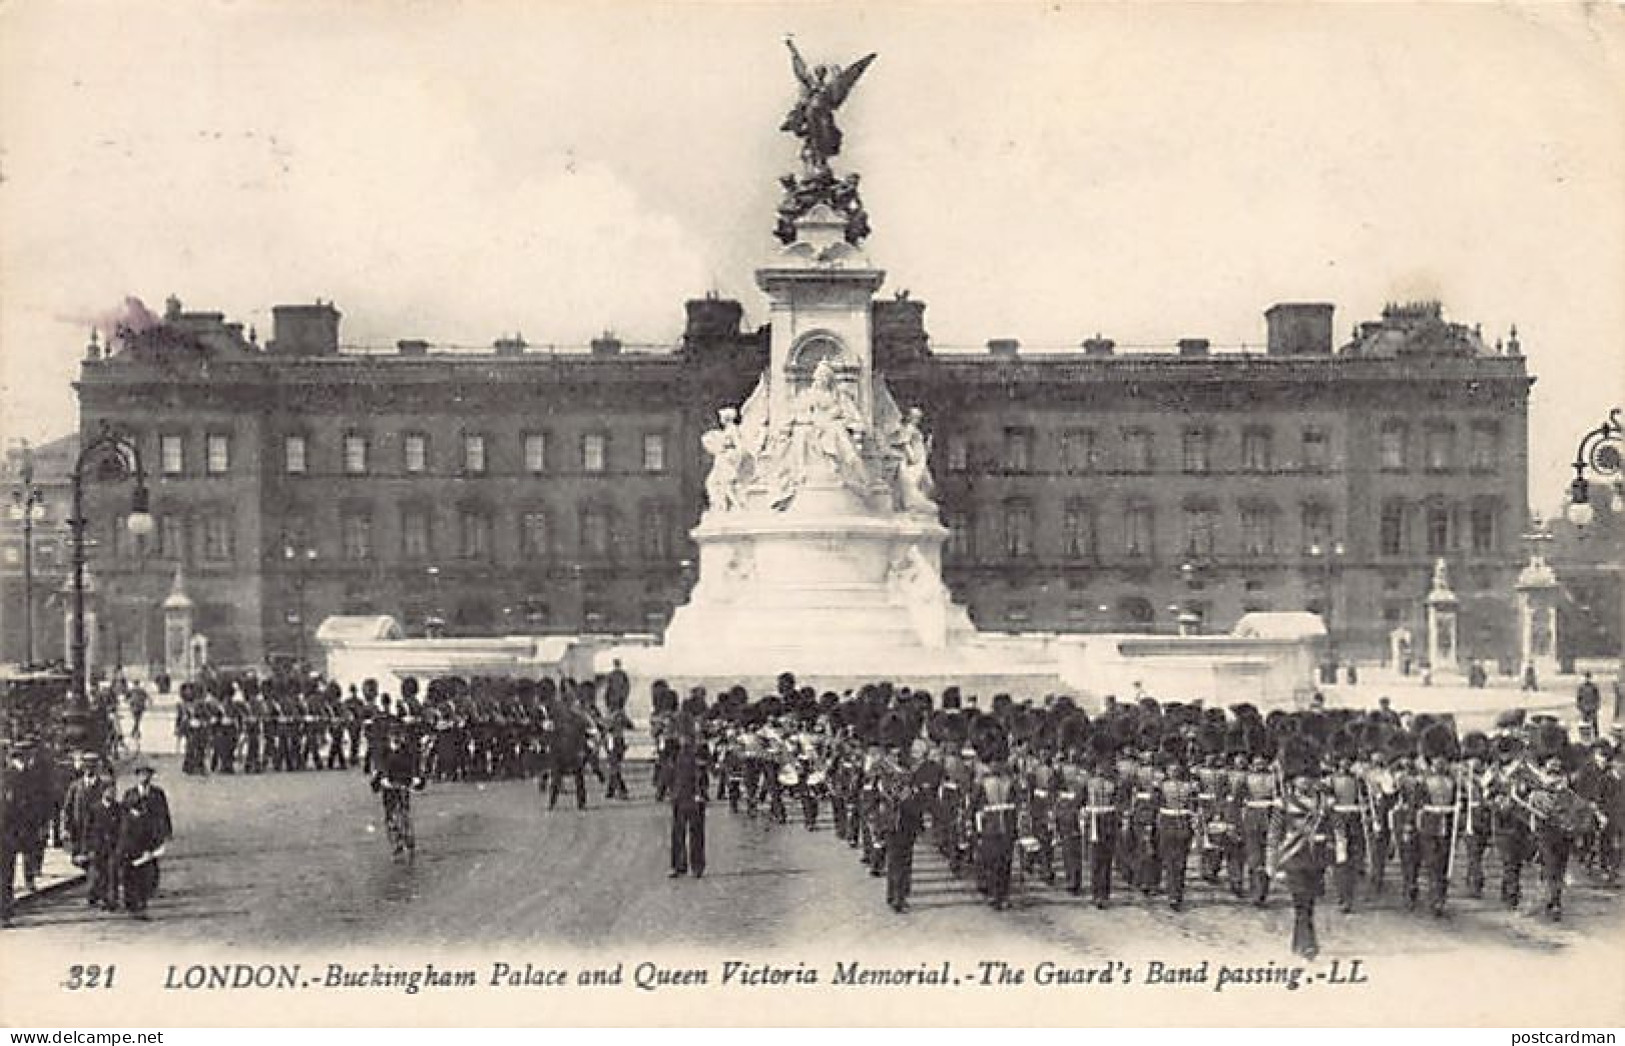 England - LONDON - Buckingham Palace - The Guard's Band Passing - Publ. LL Levy 321 - Buckingham Palace